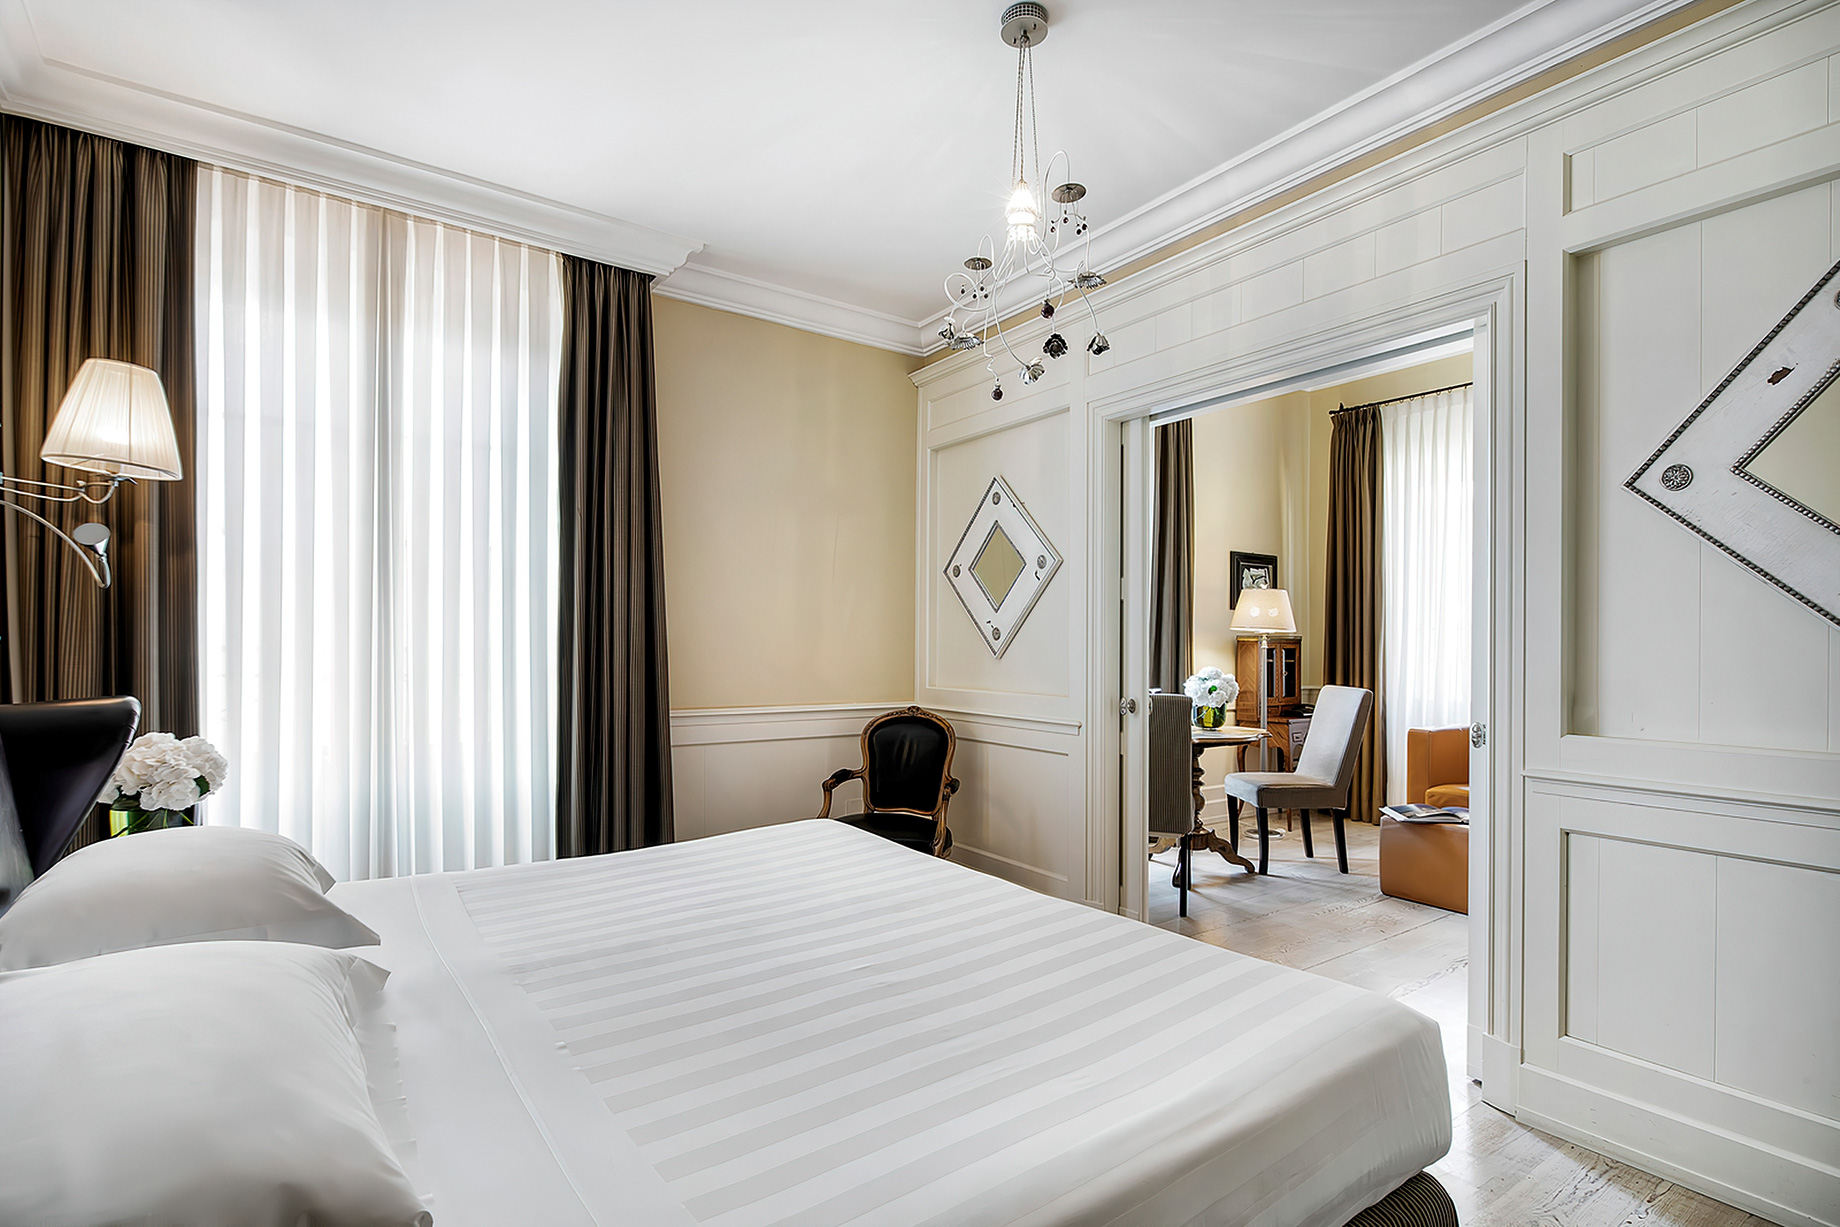 Relais Santa Croce By Baglioni Hotels & Resorts - Florence, Italy - Florentine Suite Bedroom